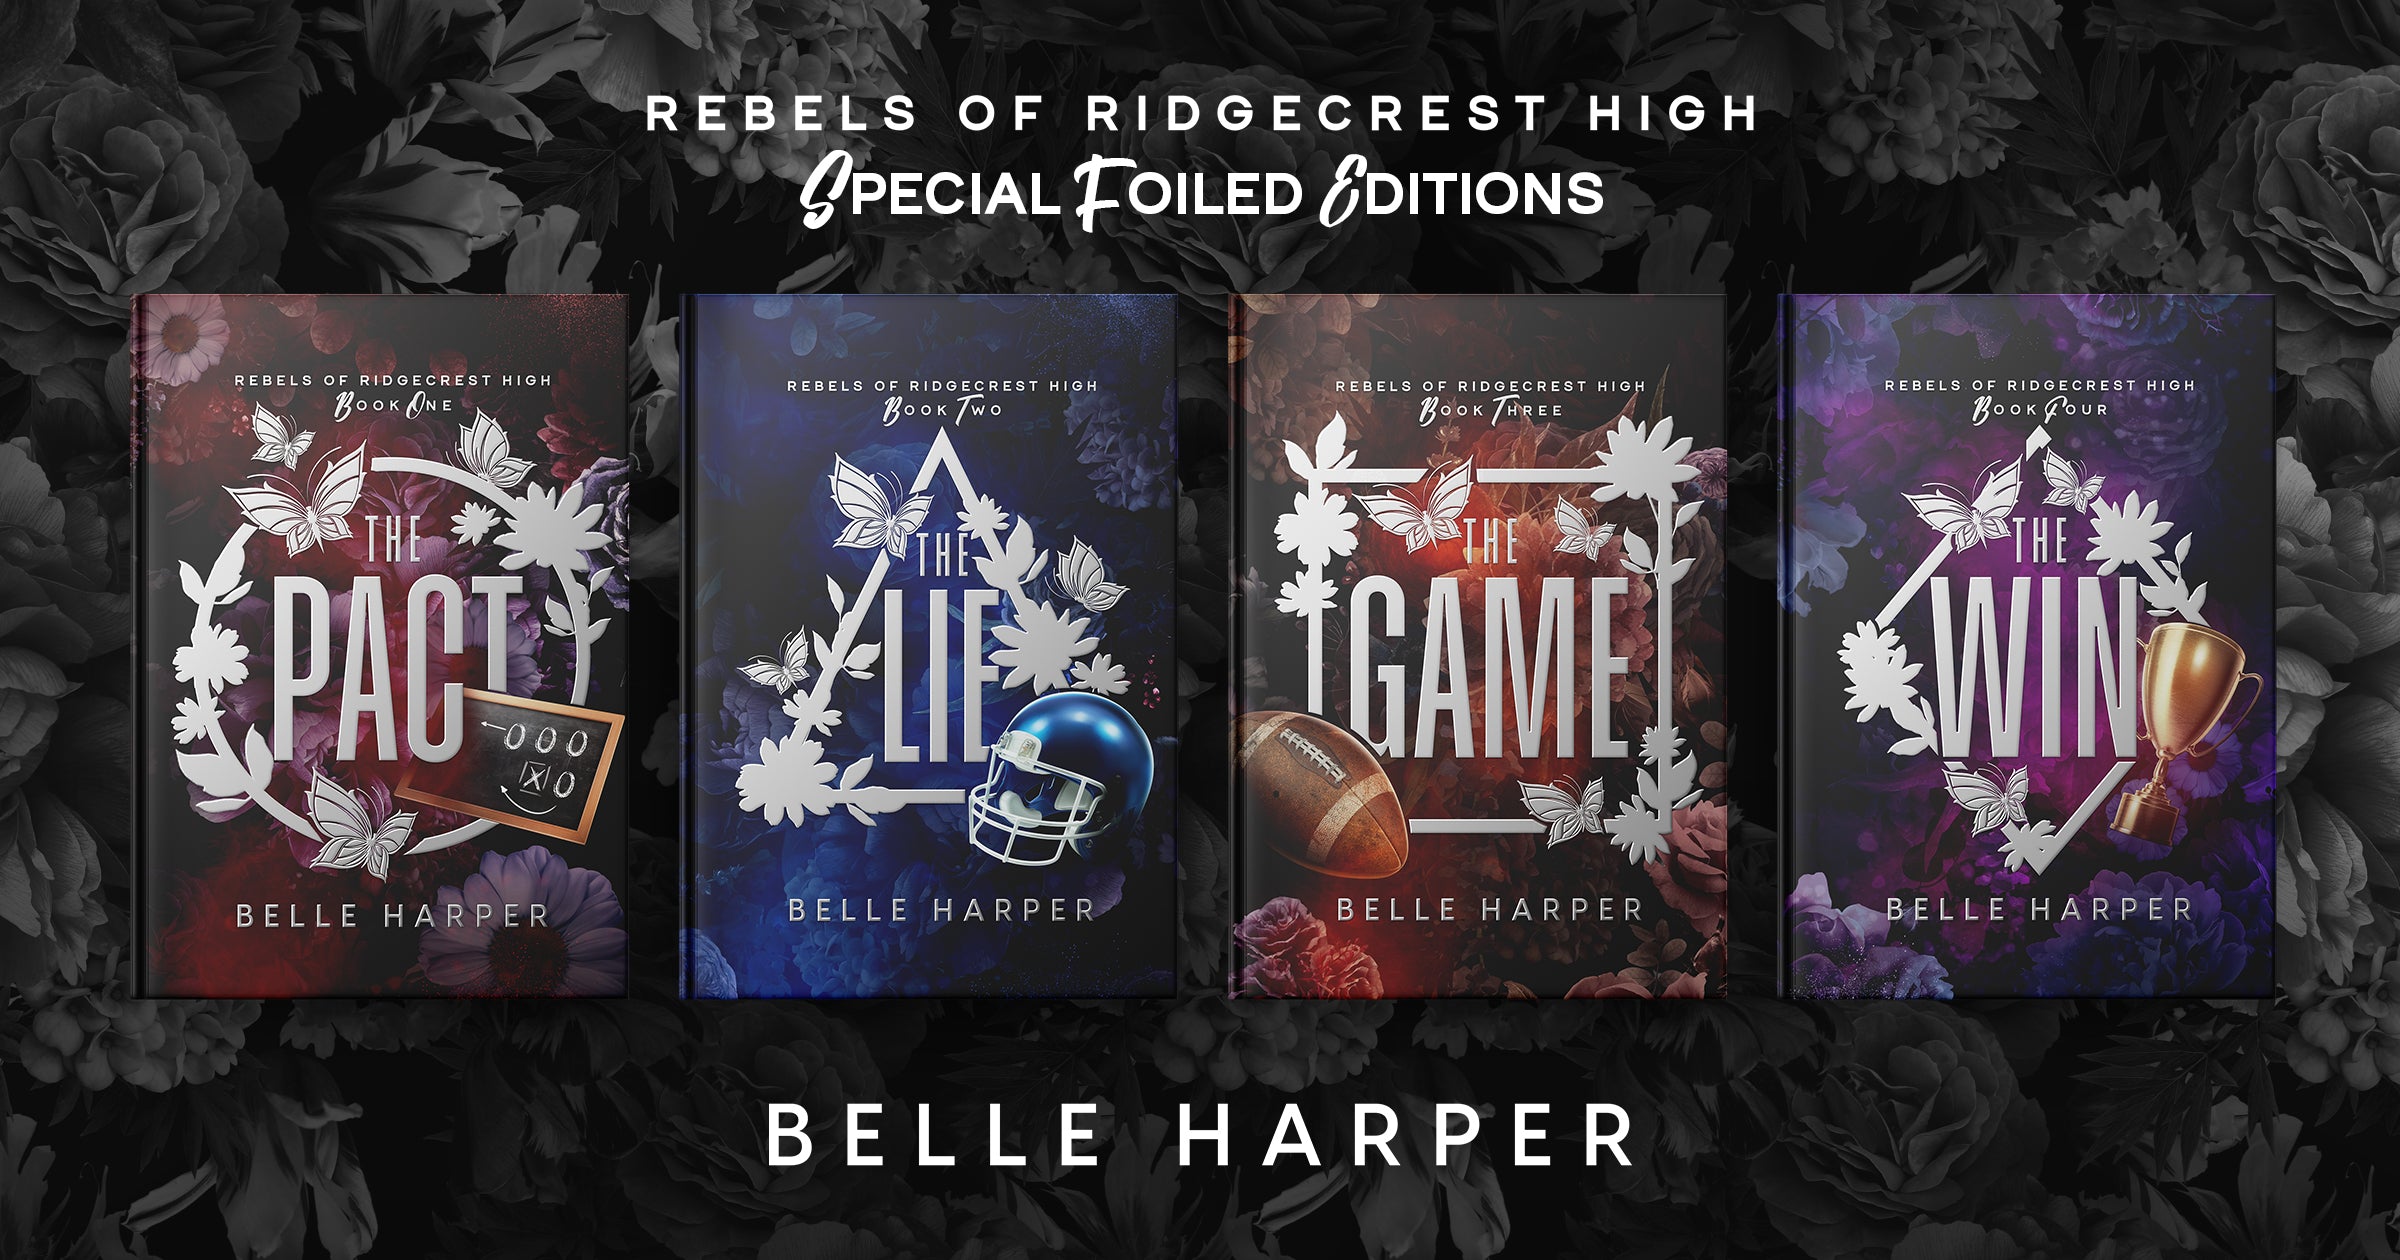 Rebels of Ridgecrest High book series. Four covers, of the foil design.